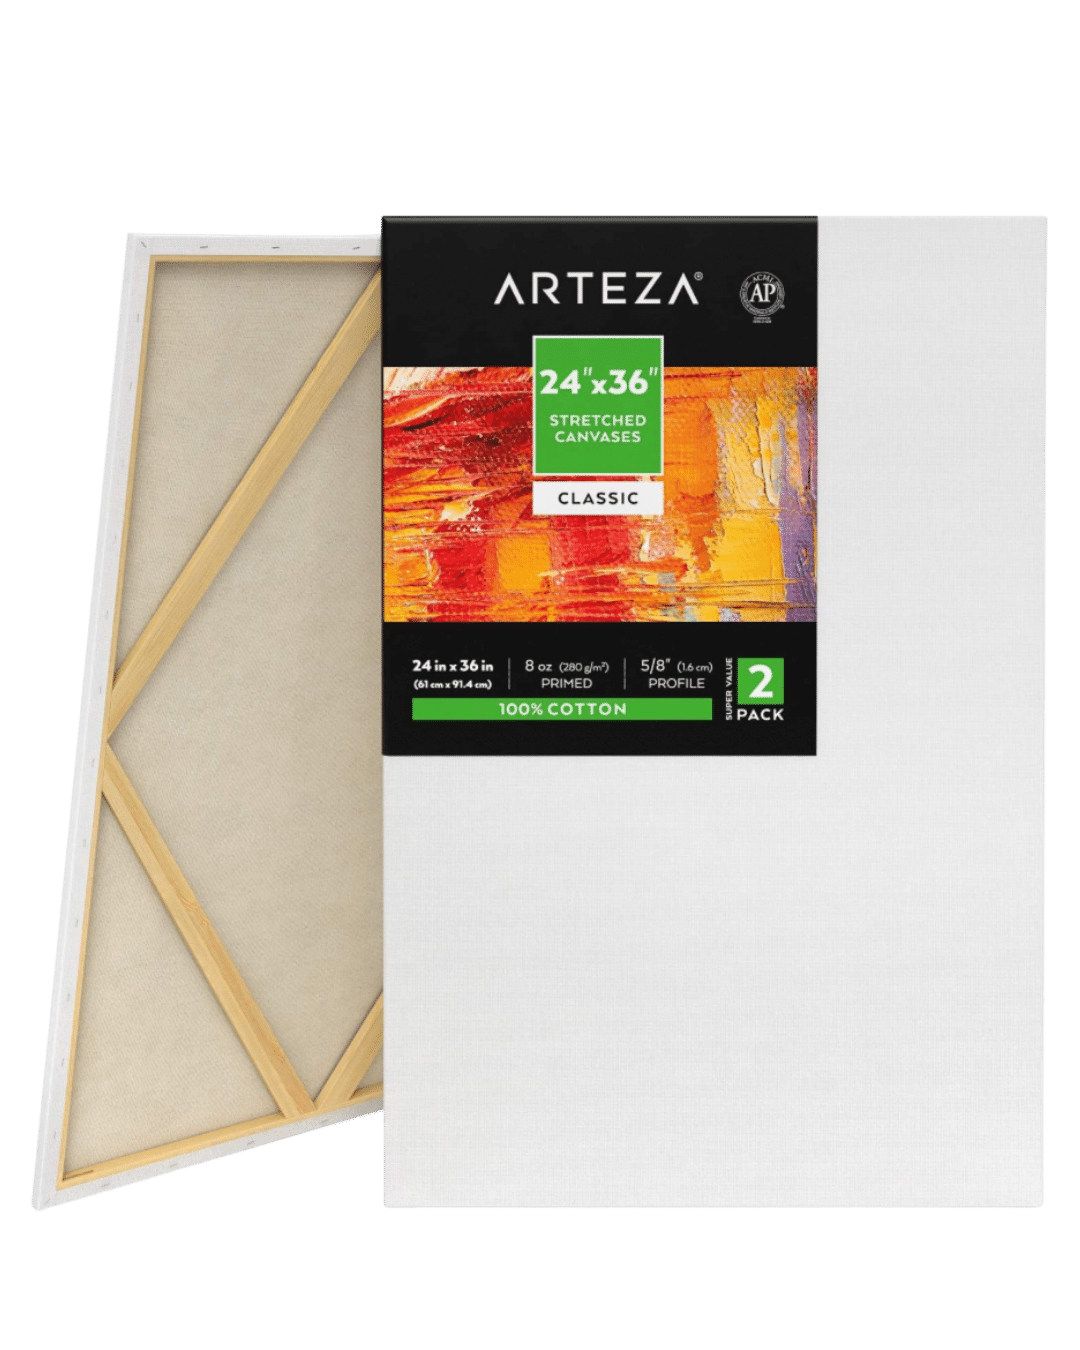 Arteza Stretched Canvas, Classic, White, 24"x36", Large Blank Canvas Boards for Painting-2 Pack